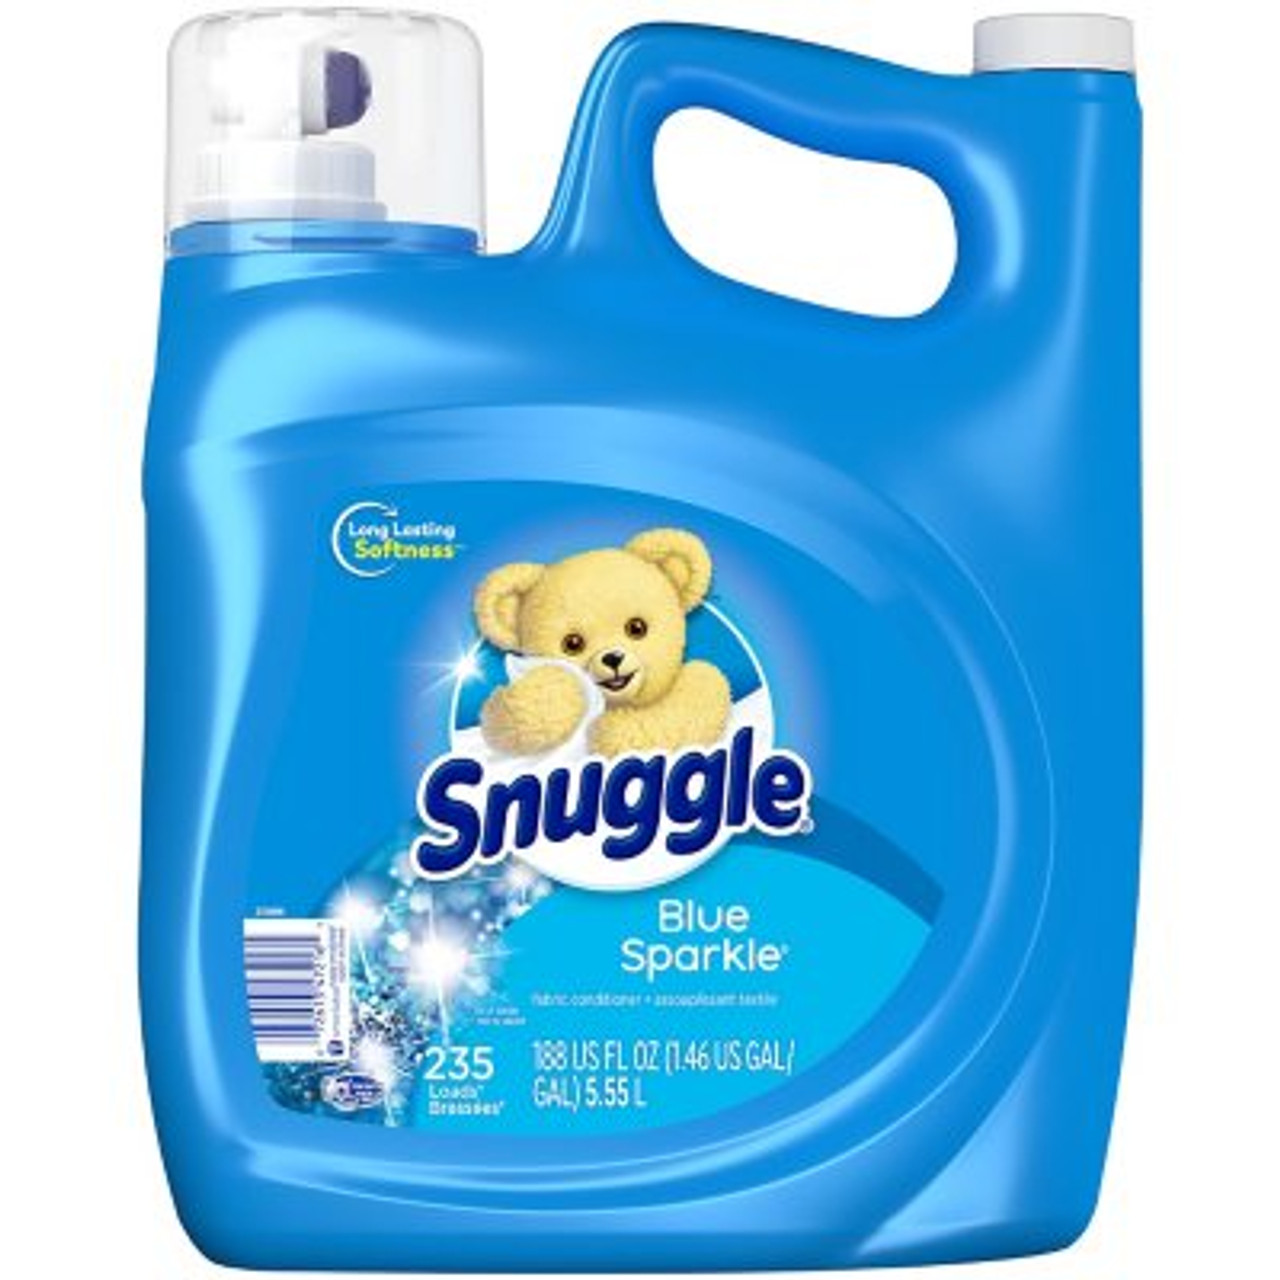 Snuggle Liquid Fabric Softener, Blue Sparkle (188 fl. oz., 235 loads) - [From 58.00 - Choose pk Qty ] - *Ships from Miami